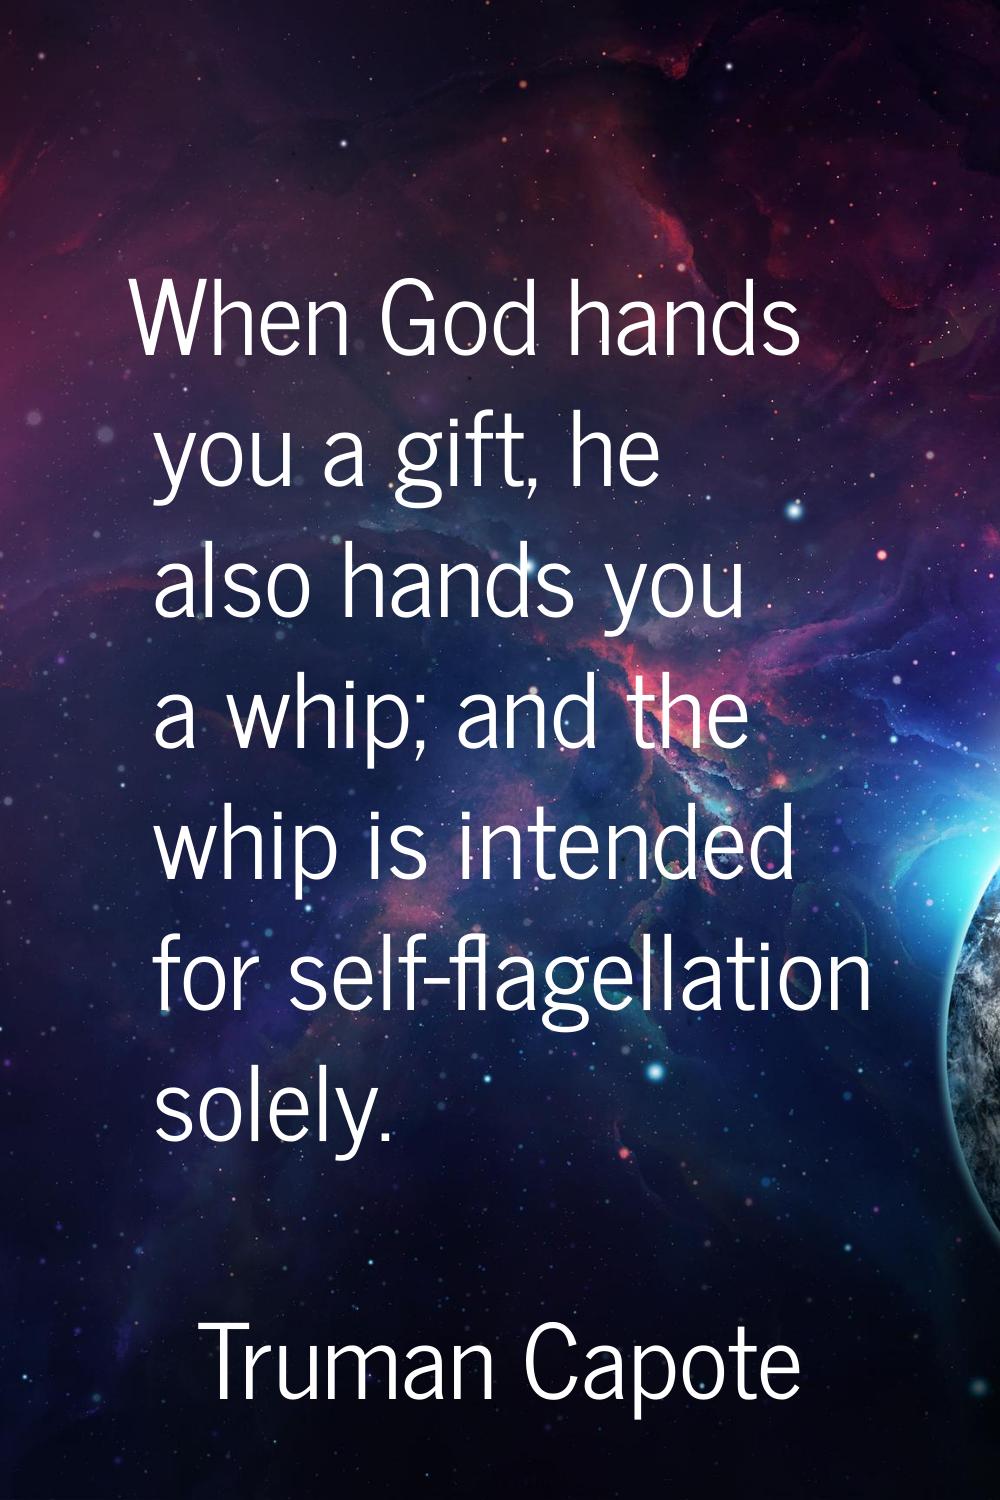 When God hands you a gift, he also hands you a whip; and the whip is intended for self-flagellation